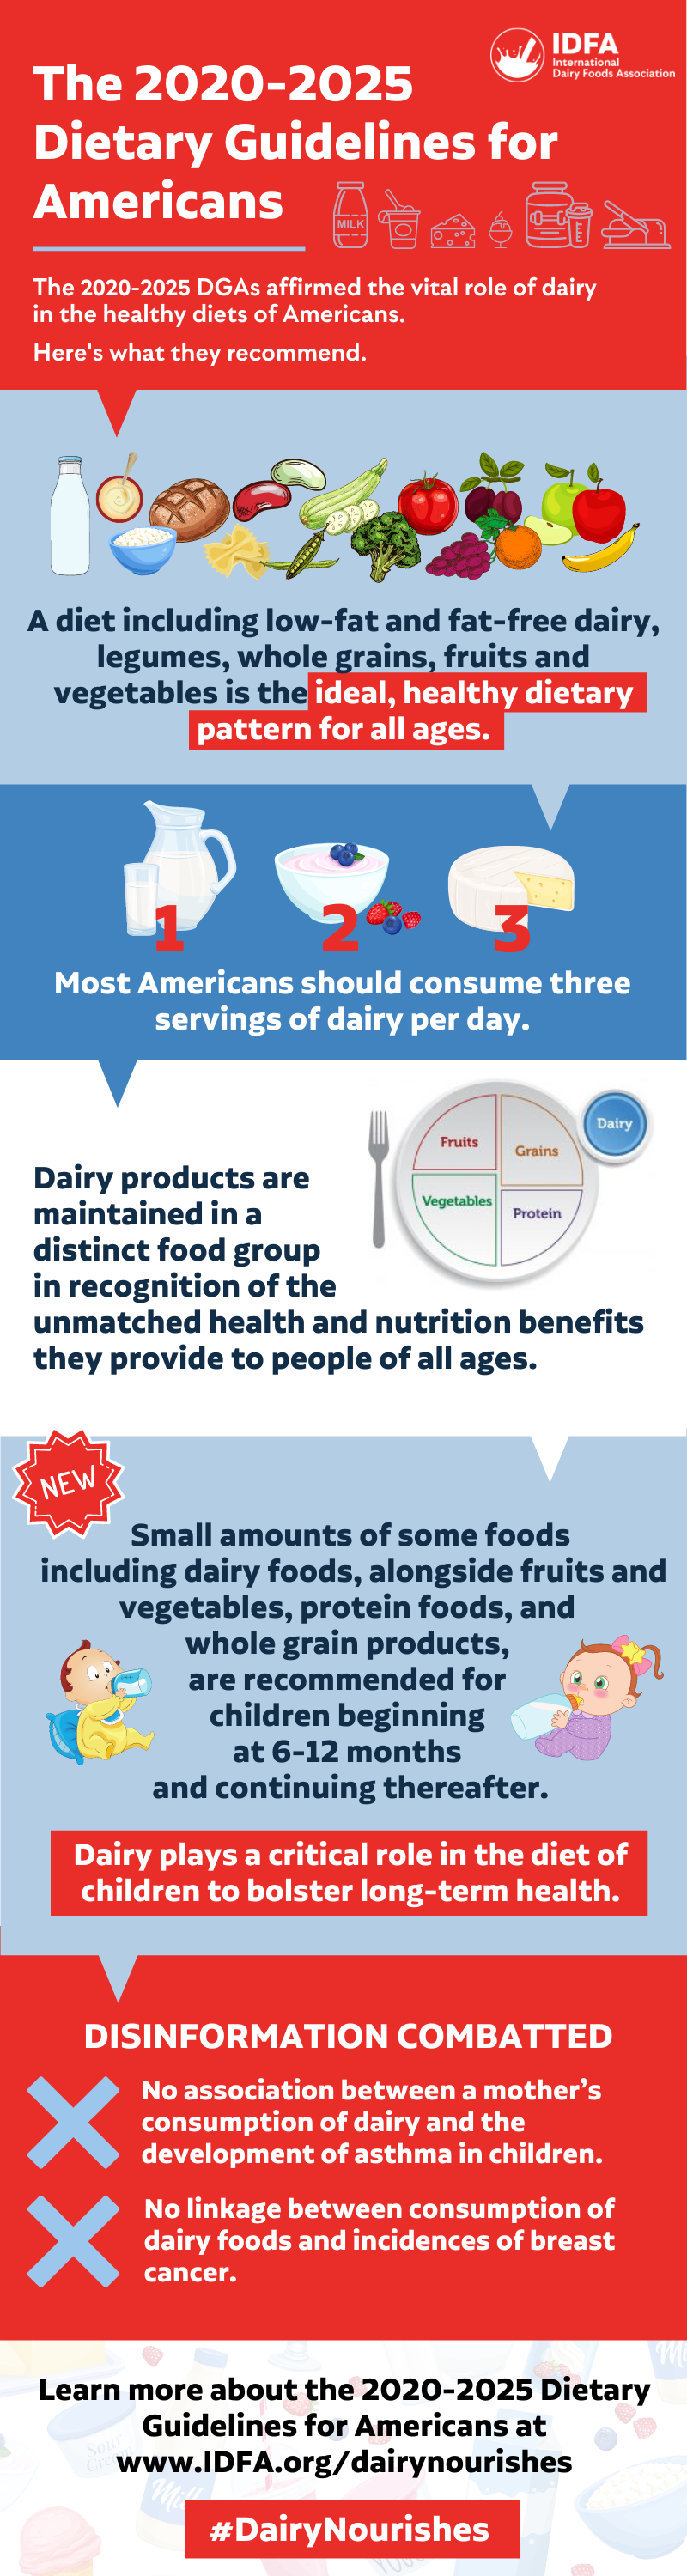 What role does dairy play in a healthy diet?